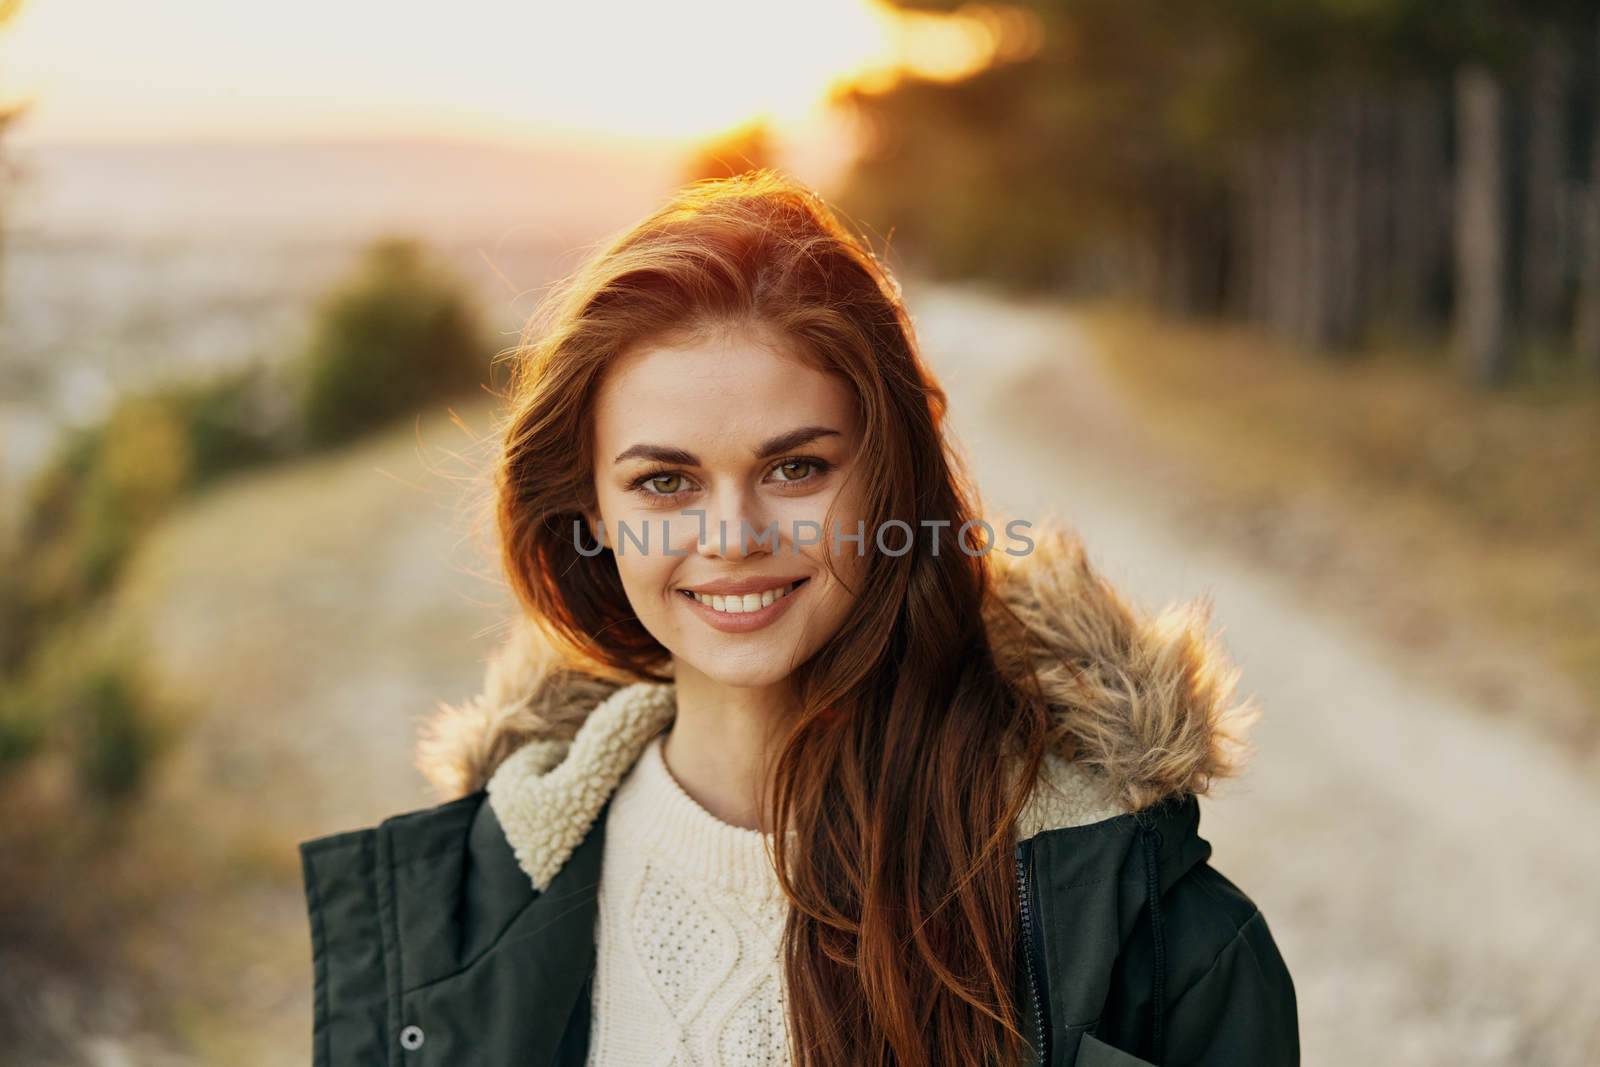 Woman jackets outdoors lifestyle faded joy fresh air. High quality photo